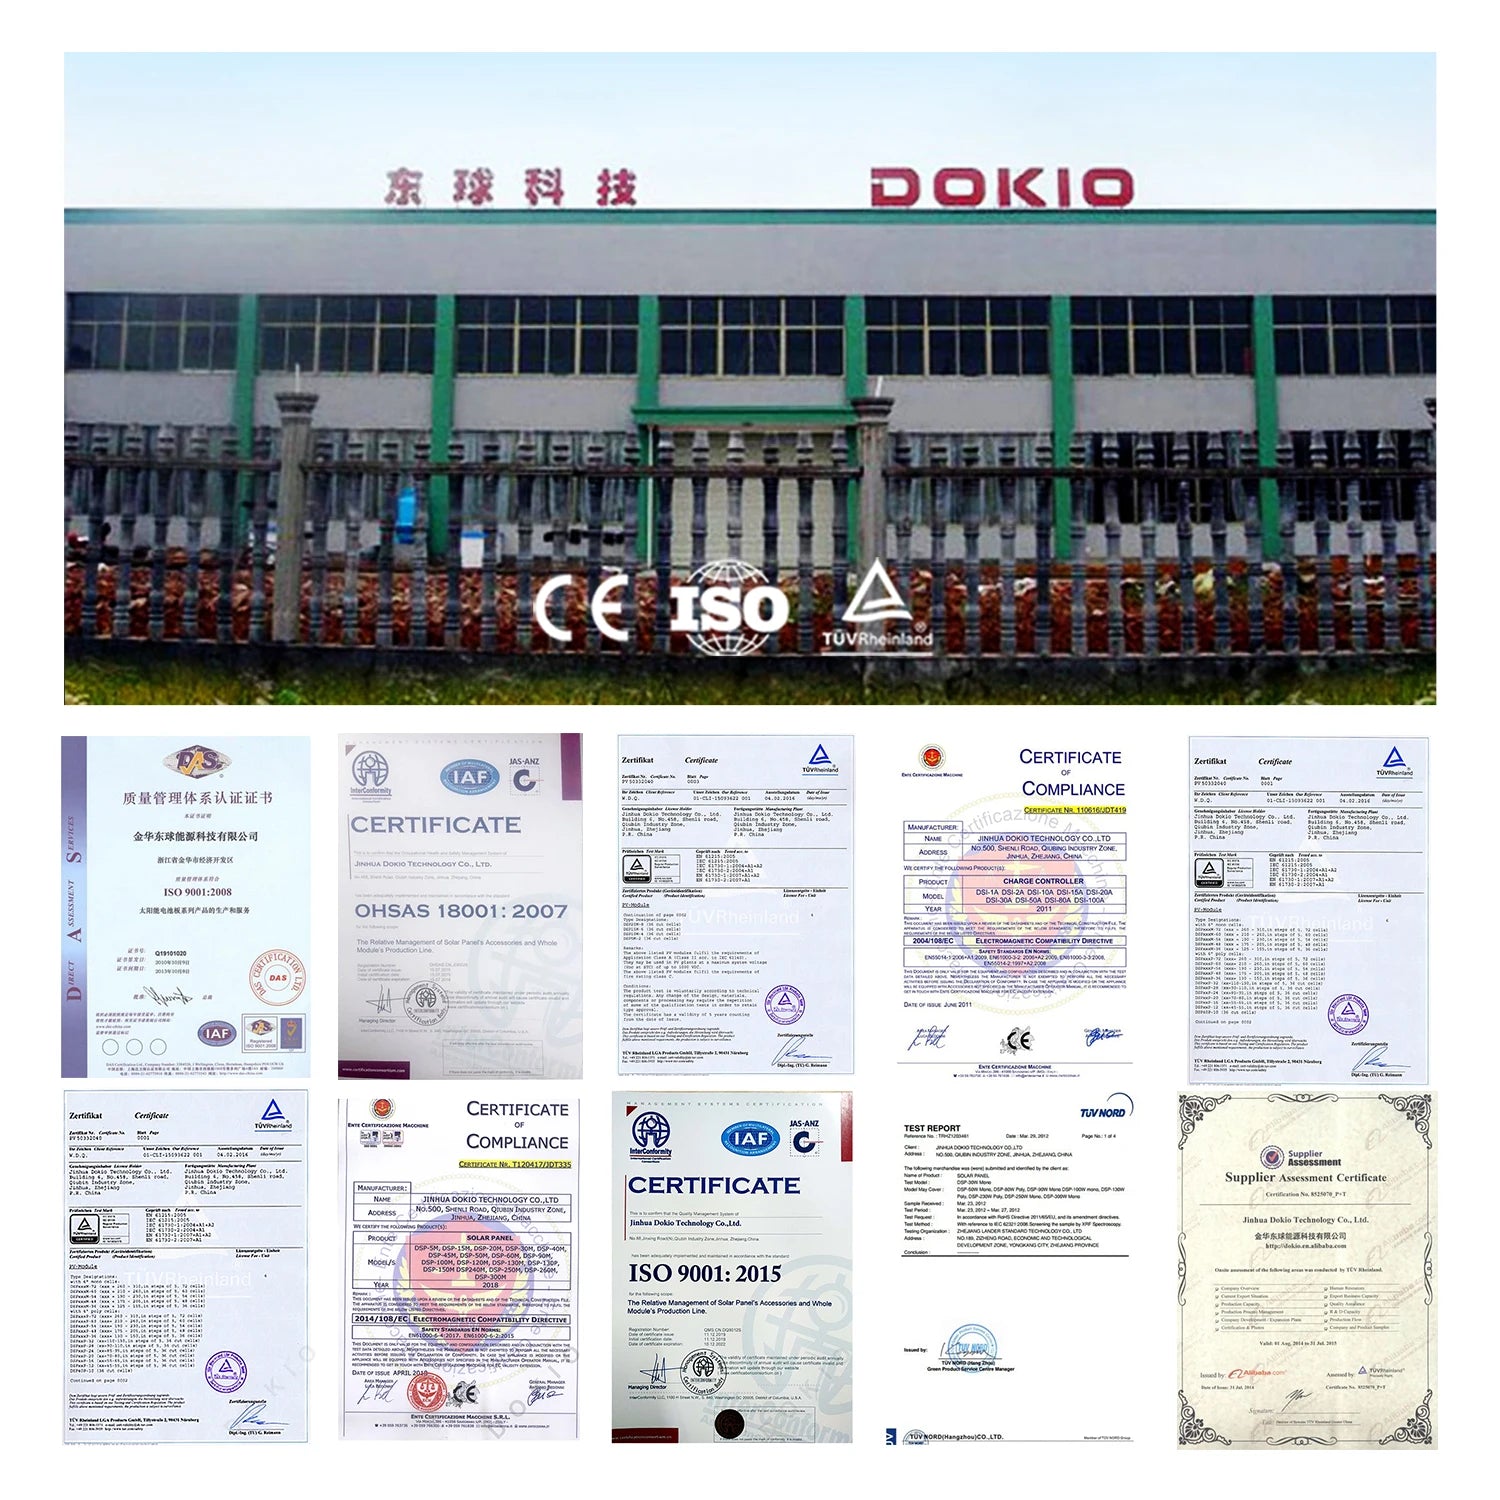 Dokio Flexible Foldable Solar Panel, Certified kit meets international standards for quality, safety, and environment.